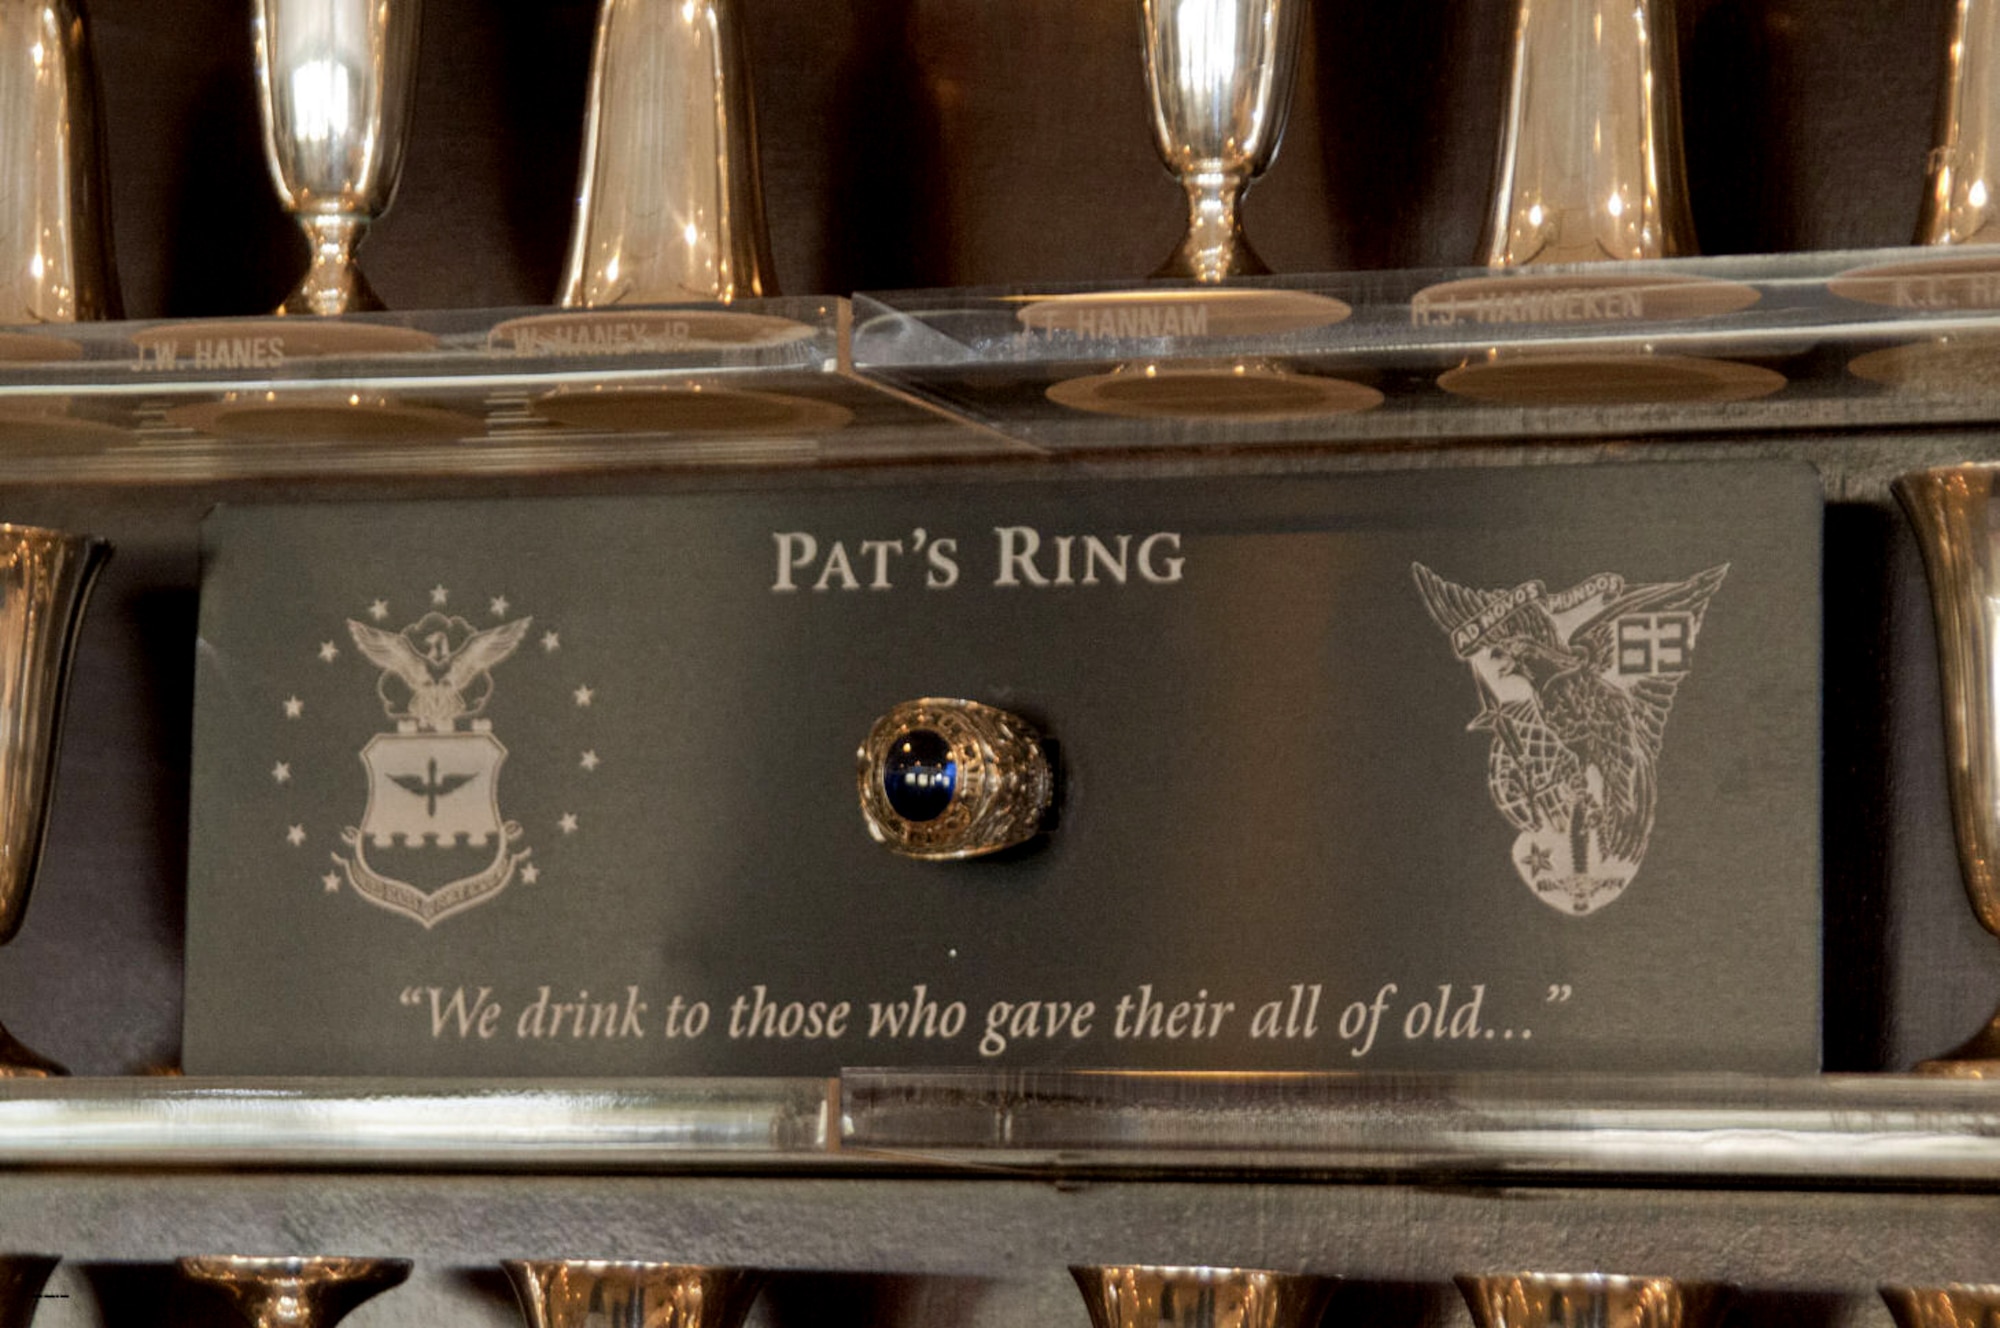 1st Lt. Patrick Wynne's Class Ring was dedicated to the Class of 1963 in a ceremony here Oct. 24.  The ring is now on display inside of a cabinet on the balcony of the Arnold Hall Ballroom. (U.S. Air Force/Courtesy Photo)